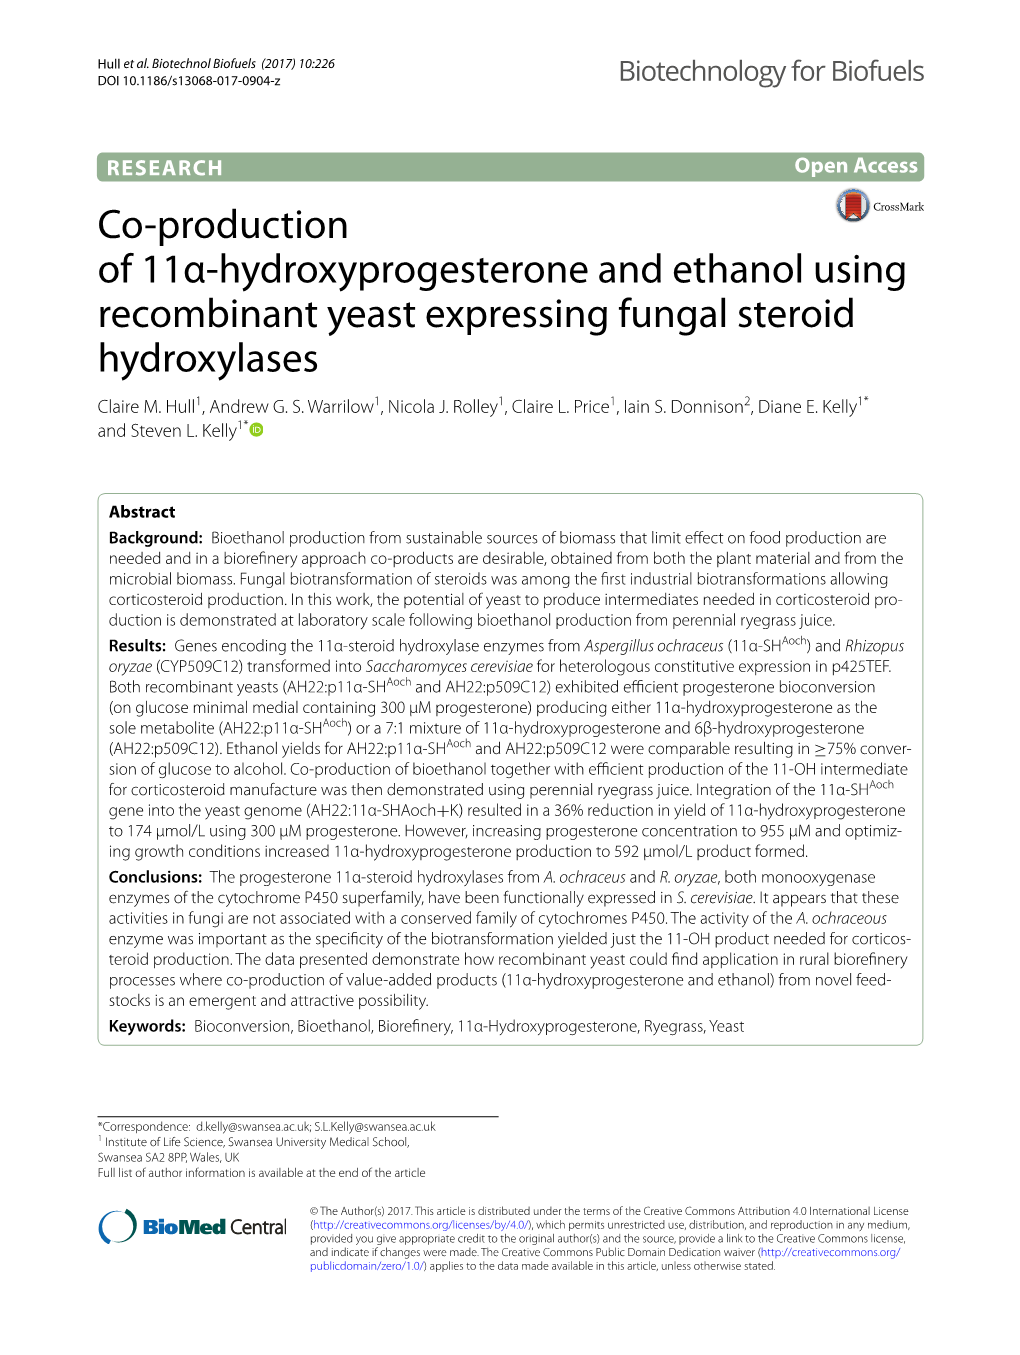 Co-Production of 11A-Hydroxyprogesterone And